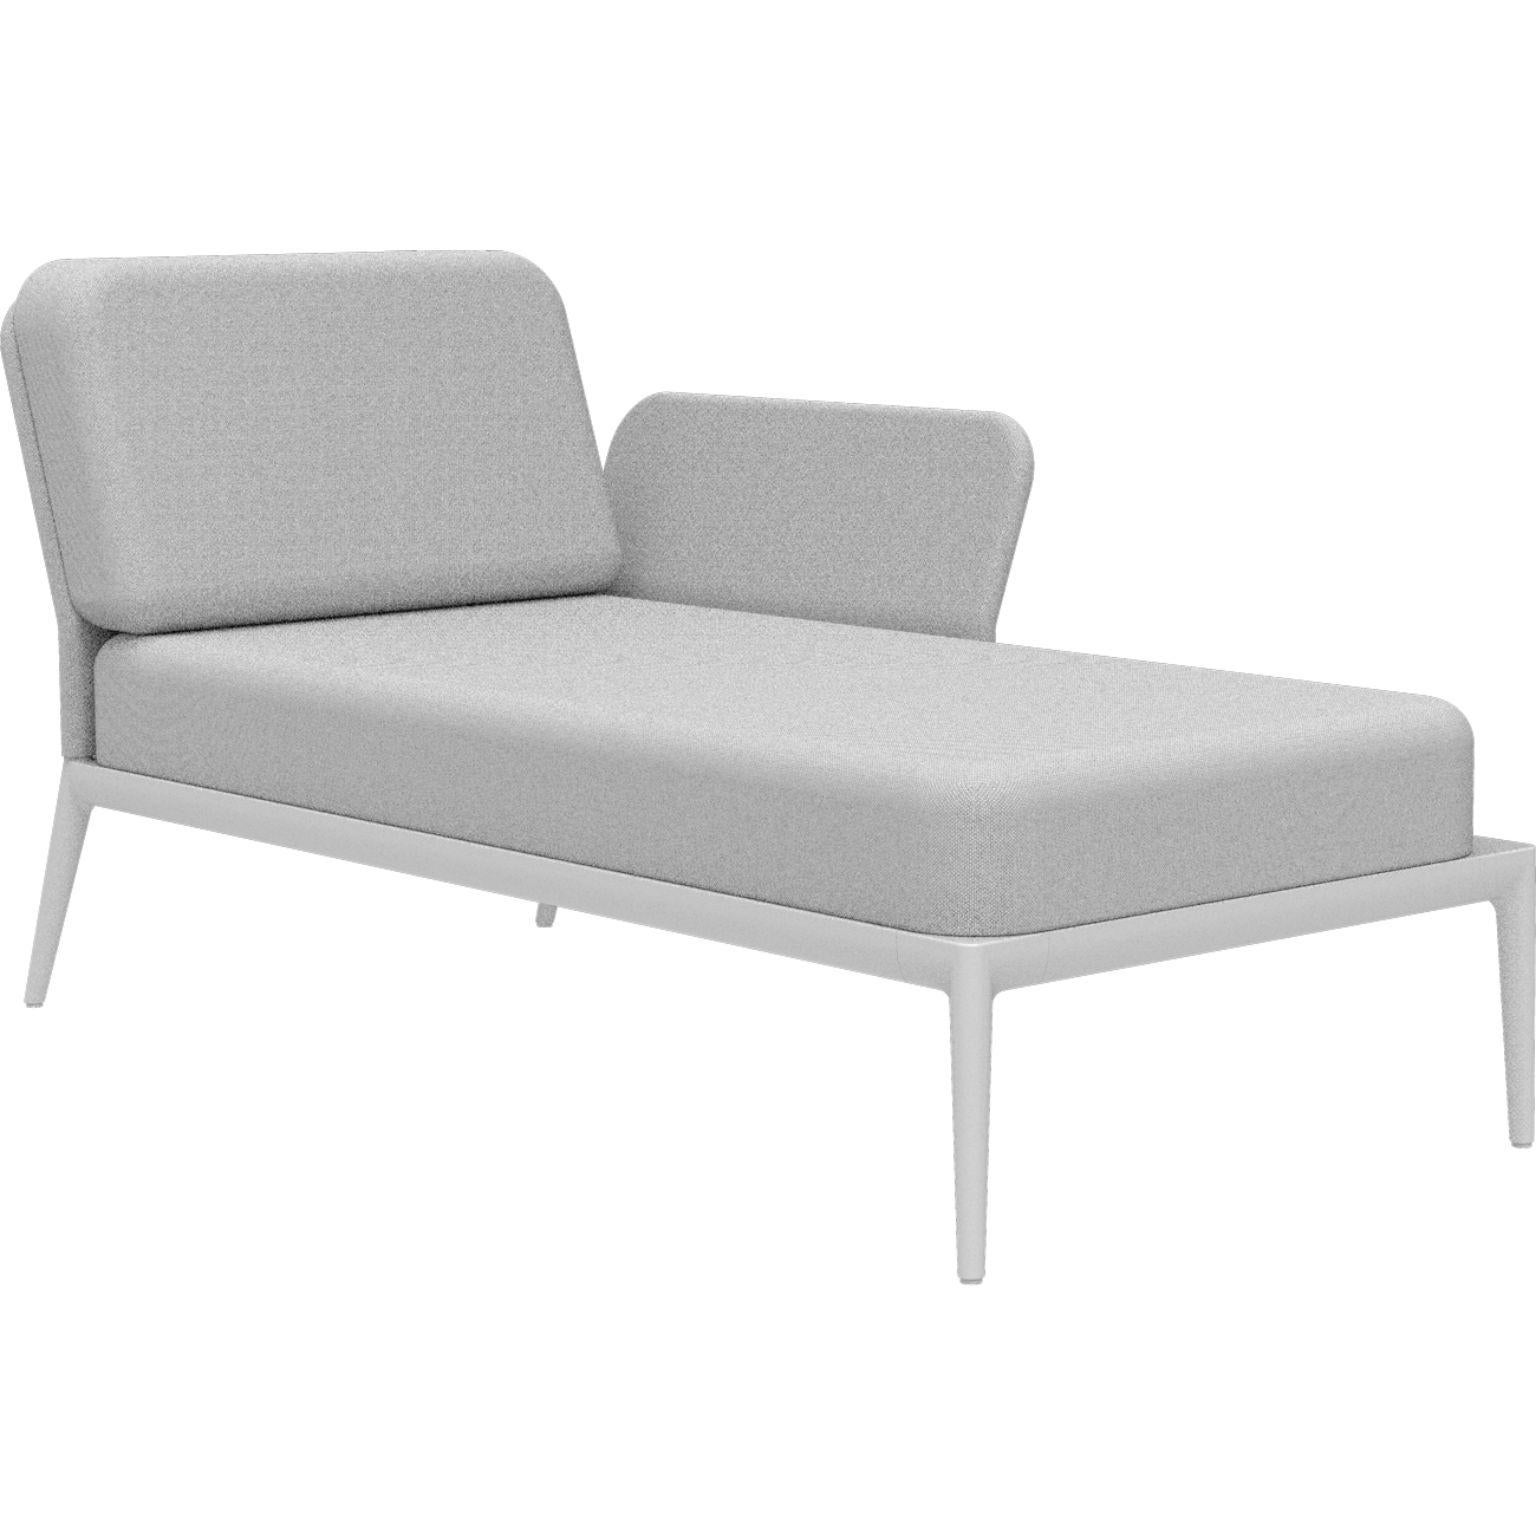 Cover White Left Chaise Longue by MOWEE
Dimensions: D80 x W155 x H81 cm (seat height 42 cm).
Material: Aluminum and upholstery.
Weight: 28 kg.
Also available in different colors and finishes. Please contact us.

An unmistakable collection for